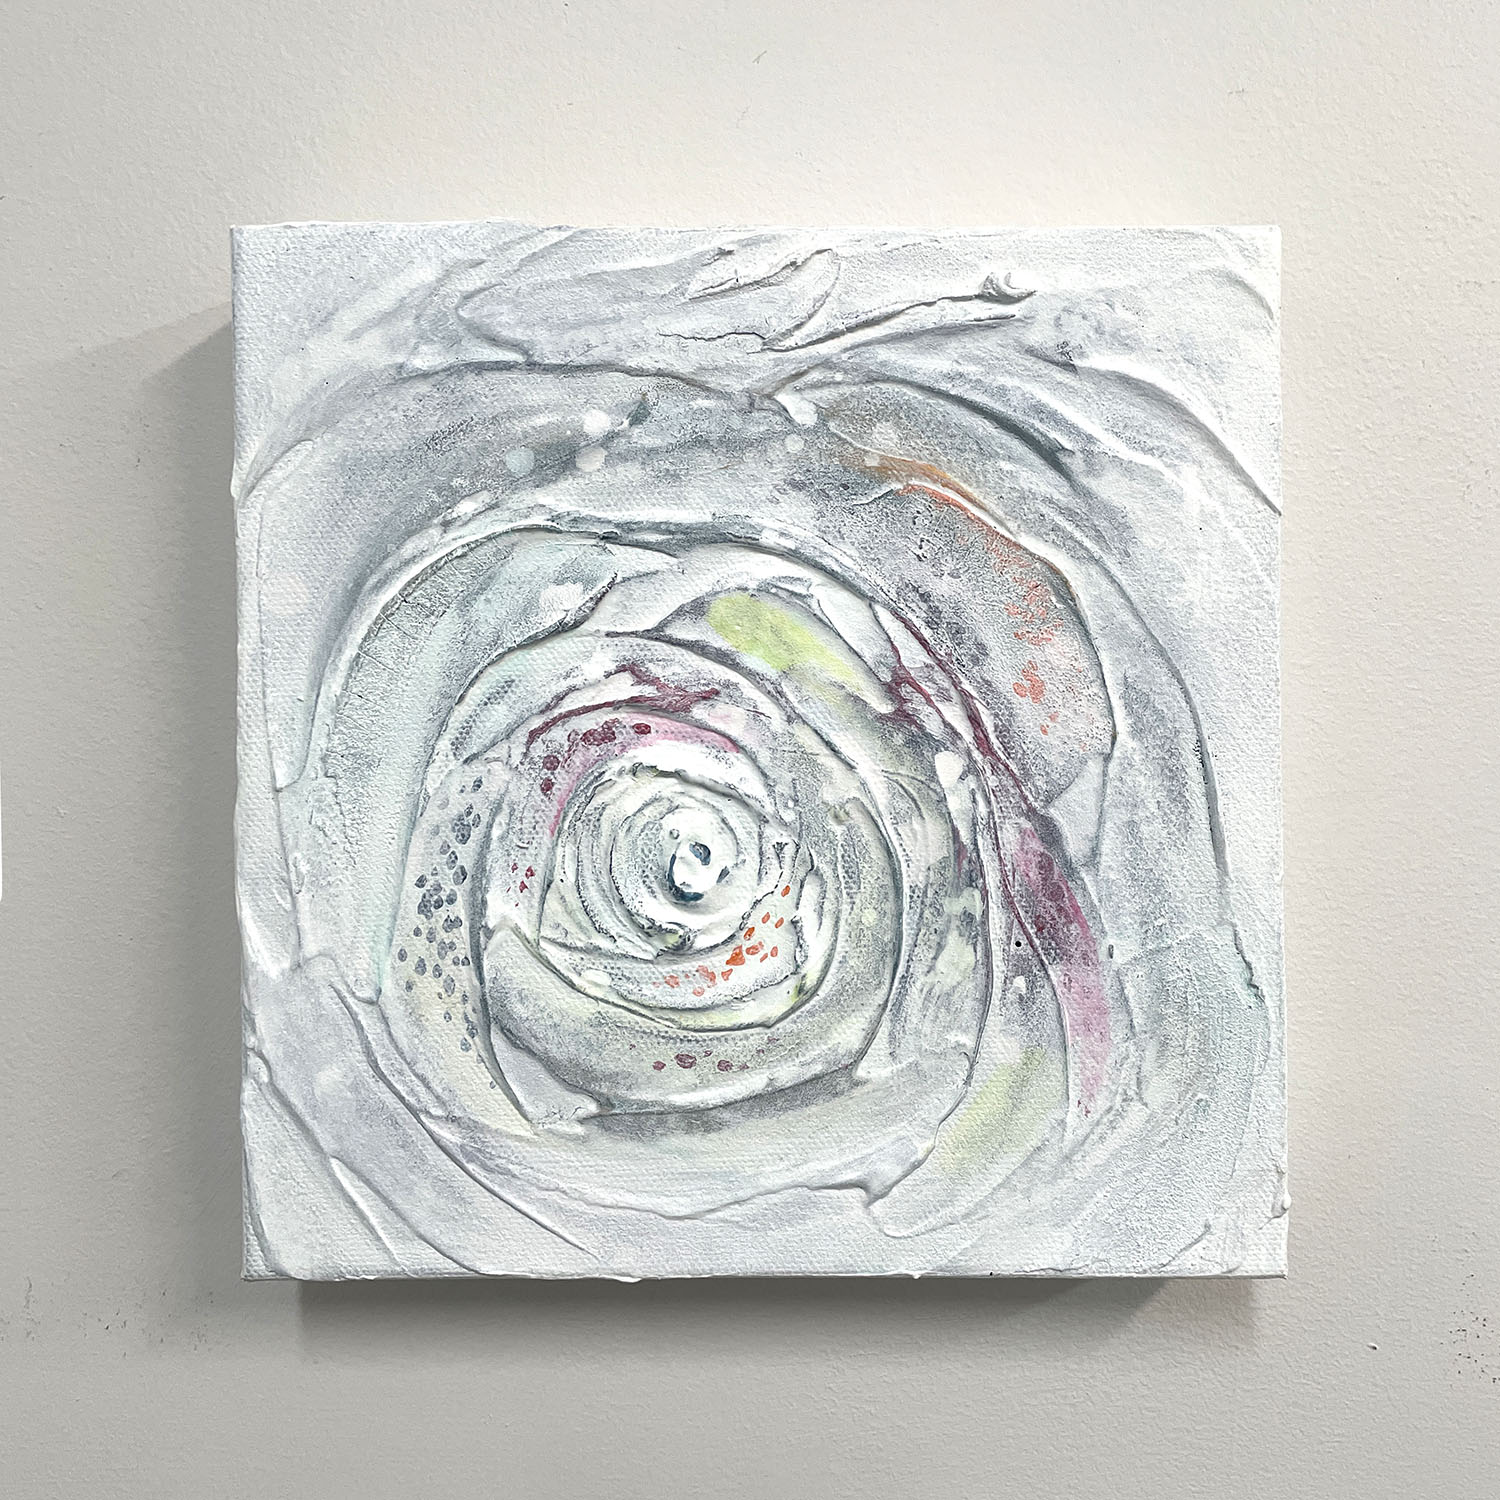 Healing2 abstract rose painting